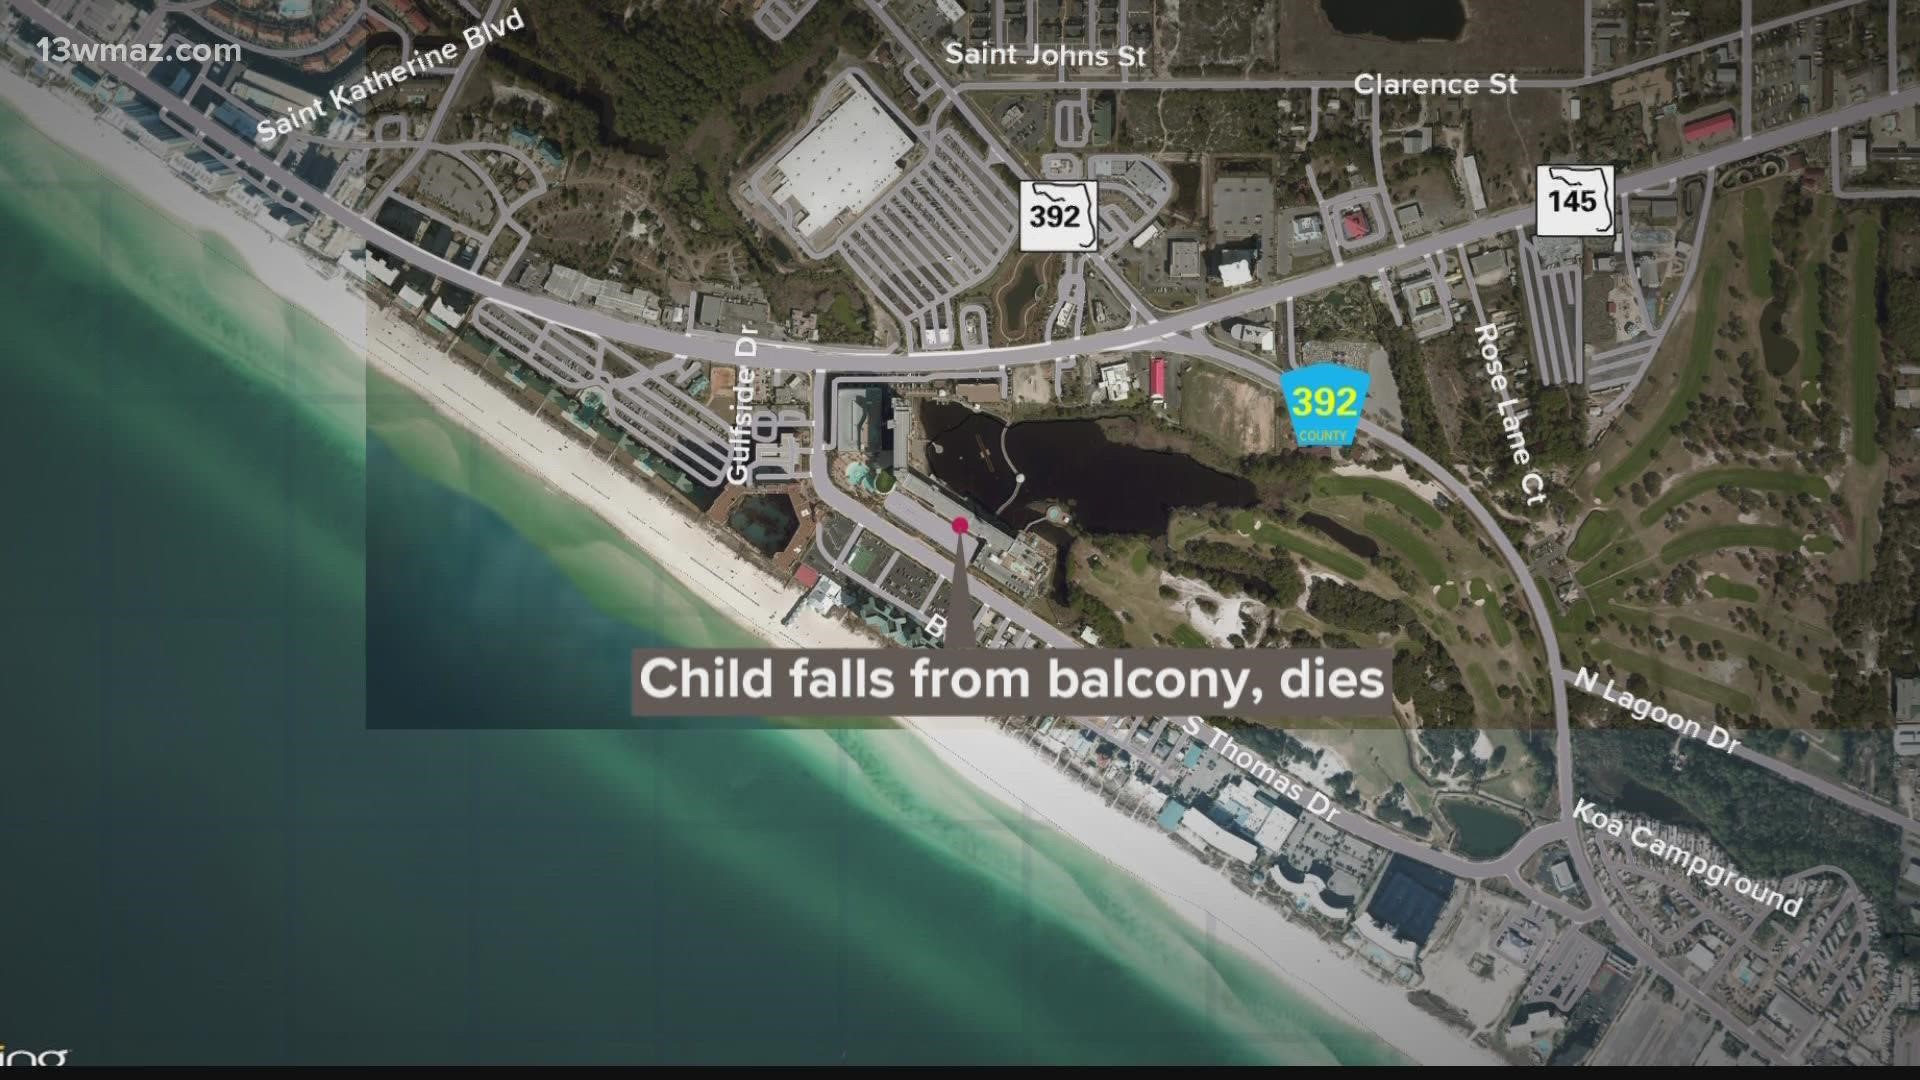 The Police Department said that a 4-year-old had fallen from the balcony.